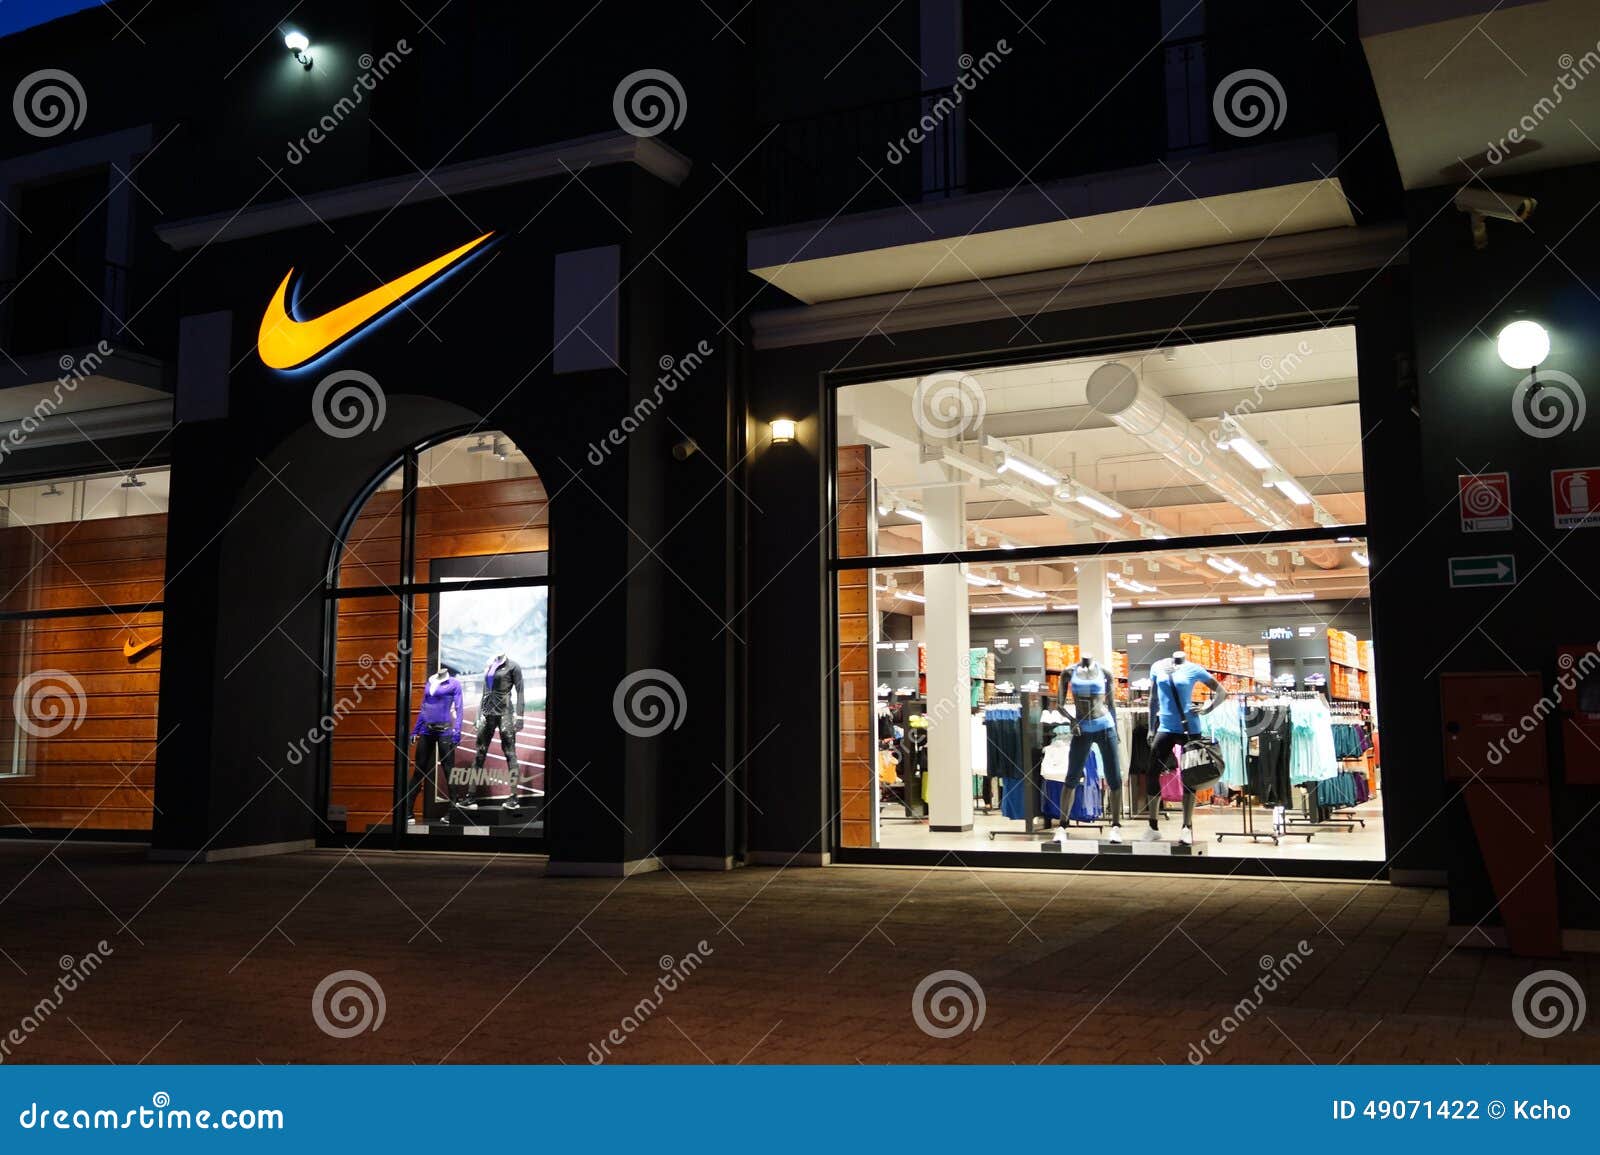 nike store in italy